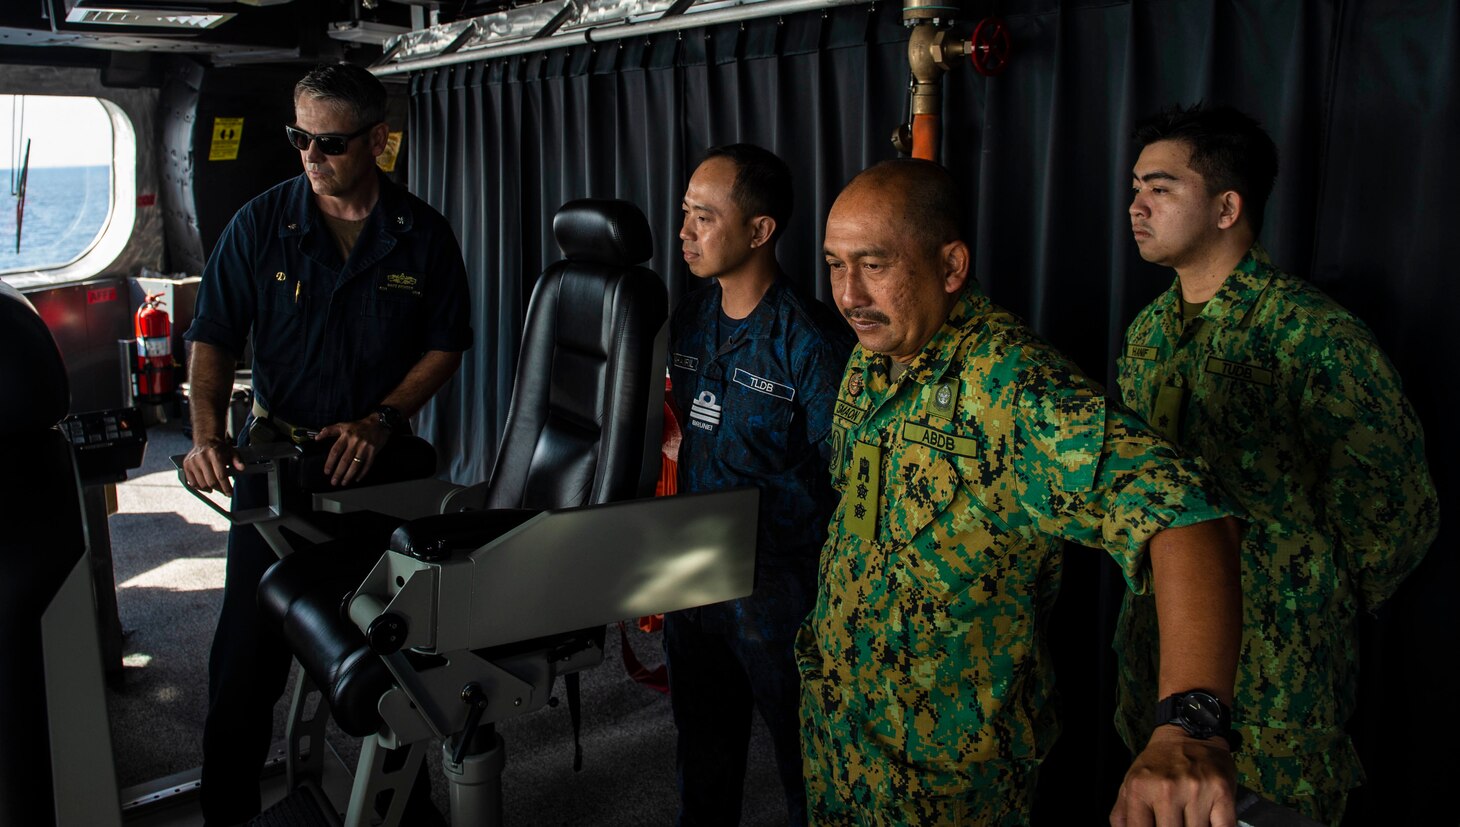 SOUTH CHINA SEA (Oct. 30, 2019) Cmdr. Matthew Richter, commanding officer of the Independence-variant littoral combat ship USS Montgomery (LCS 8) Gold Crew, provides a tour of the bridge to Royal Brunei Armed Forces during Cooperation Afloat Readiness and Training (CARAT) Brunei. This year marks the 25th iteration of CARAT, a multinational exercise designed to enhance U.S. and partner navies' abilities to operate together in response to traditional and non-traditional maritime security challenges in the Indo-Pacific region.